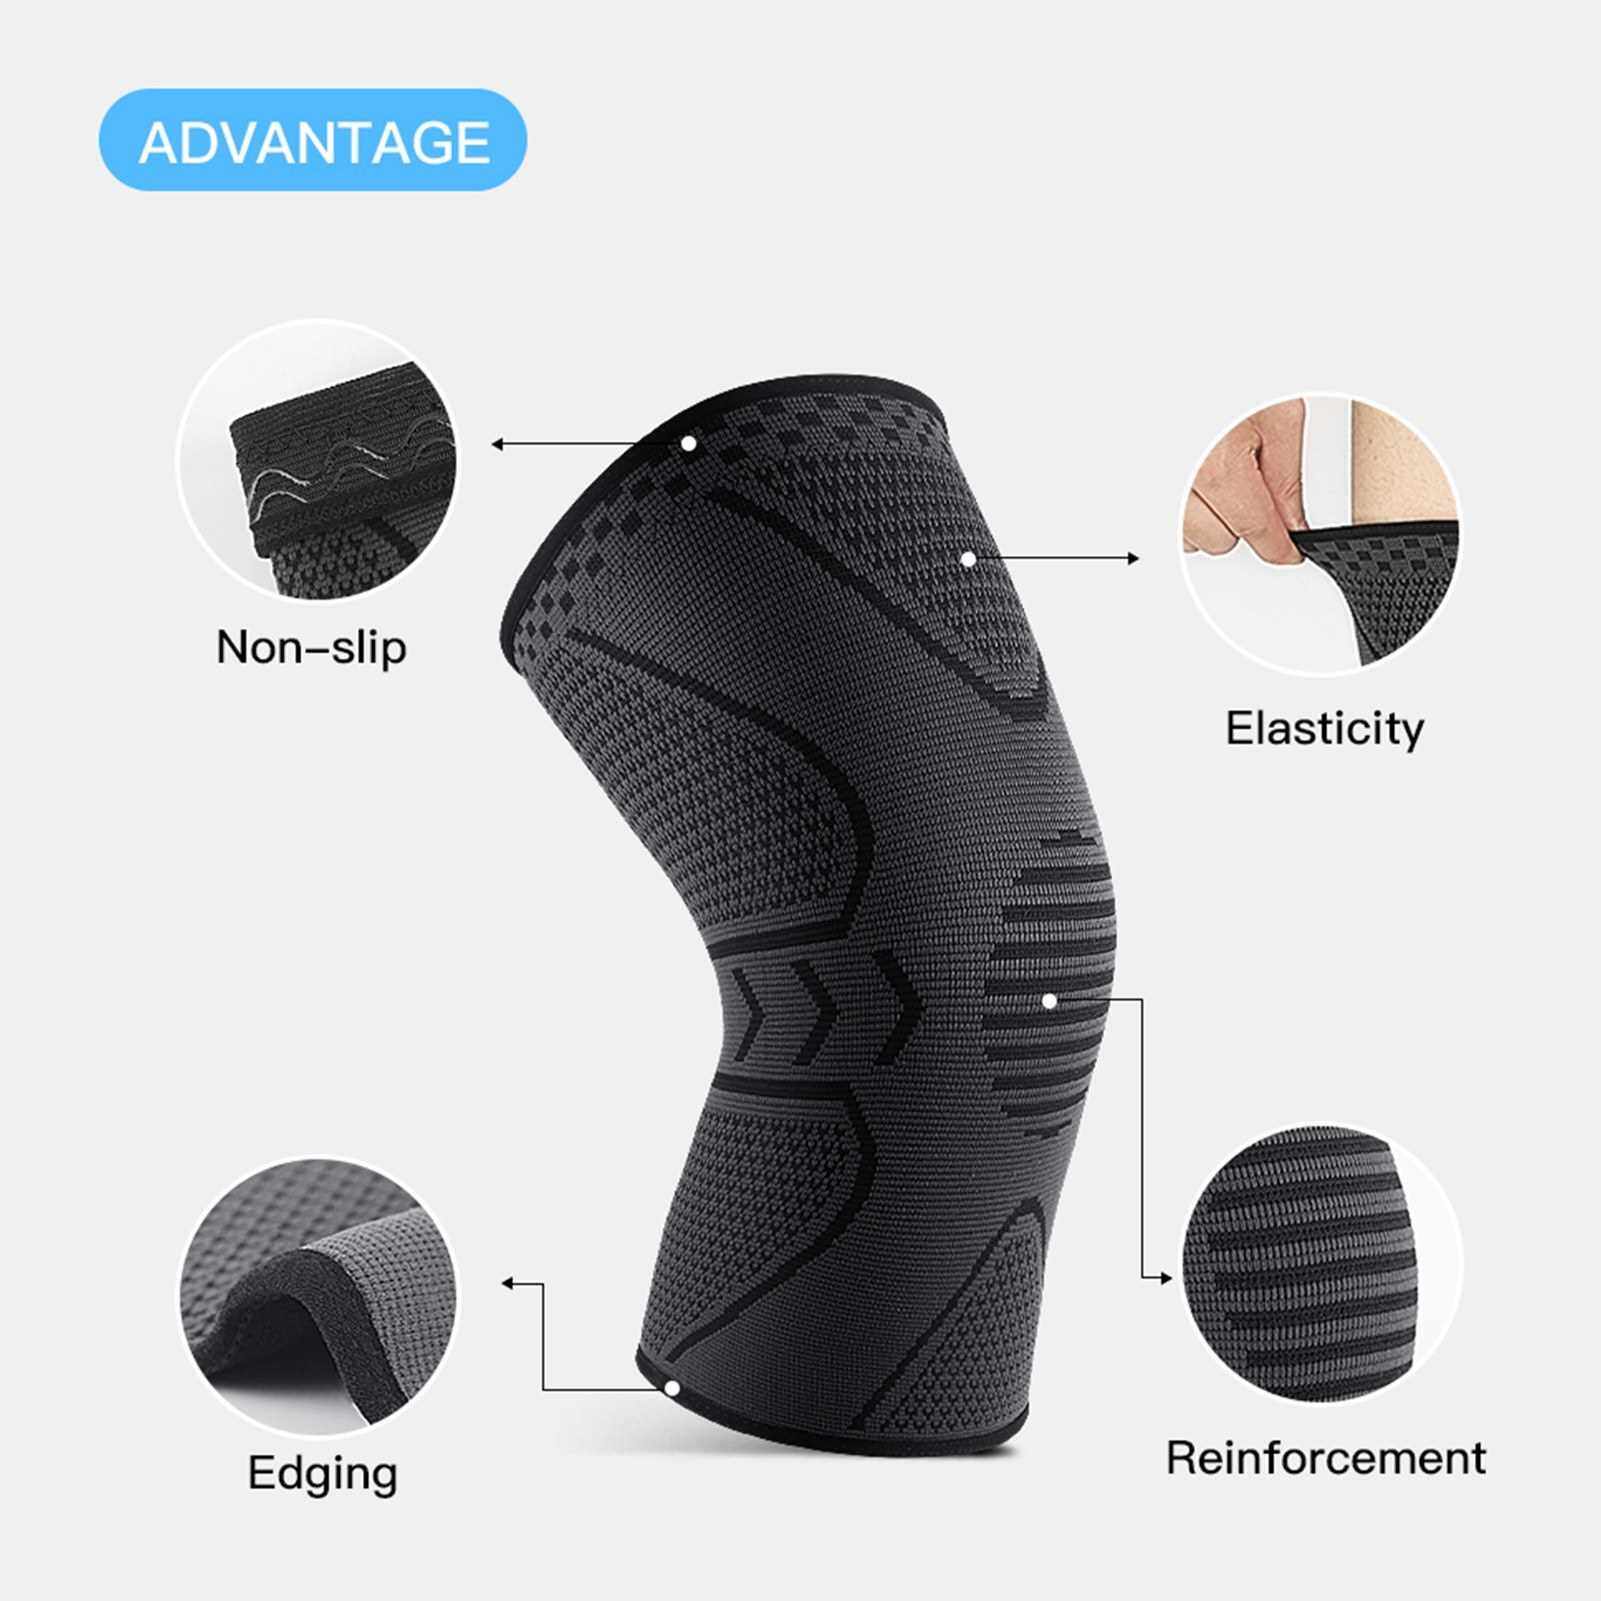 BEST SELLER 1PCS Kneepads Knee Support Protector with Silicone Design and Flexible Elastic Fitness Soft Breathable for Outdoor Activities Hiking Climbing Running Cycling Yoga (Red)